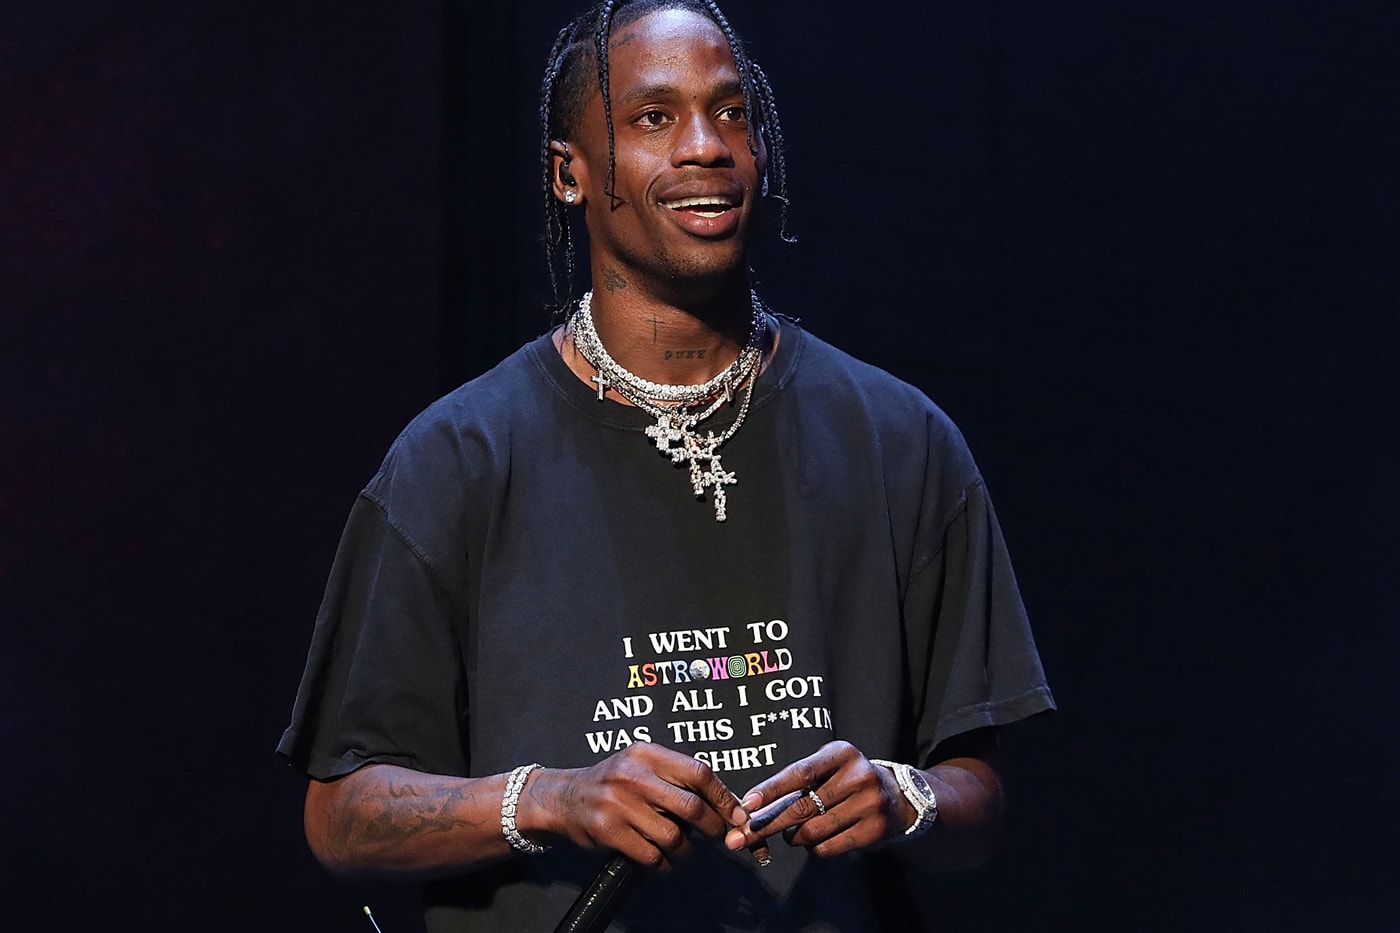 Travis Scott Charitable Replace Lost Items Pay Tuition Twitter Info